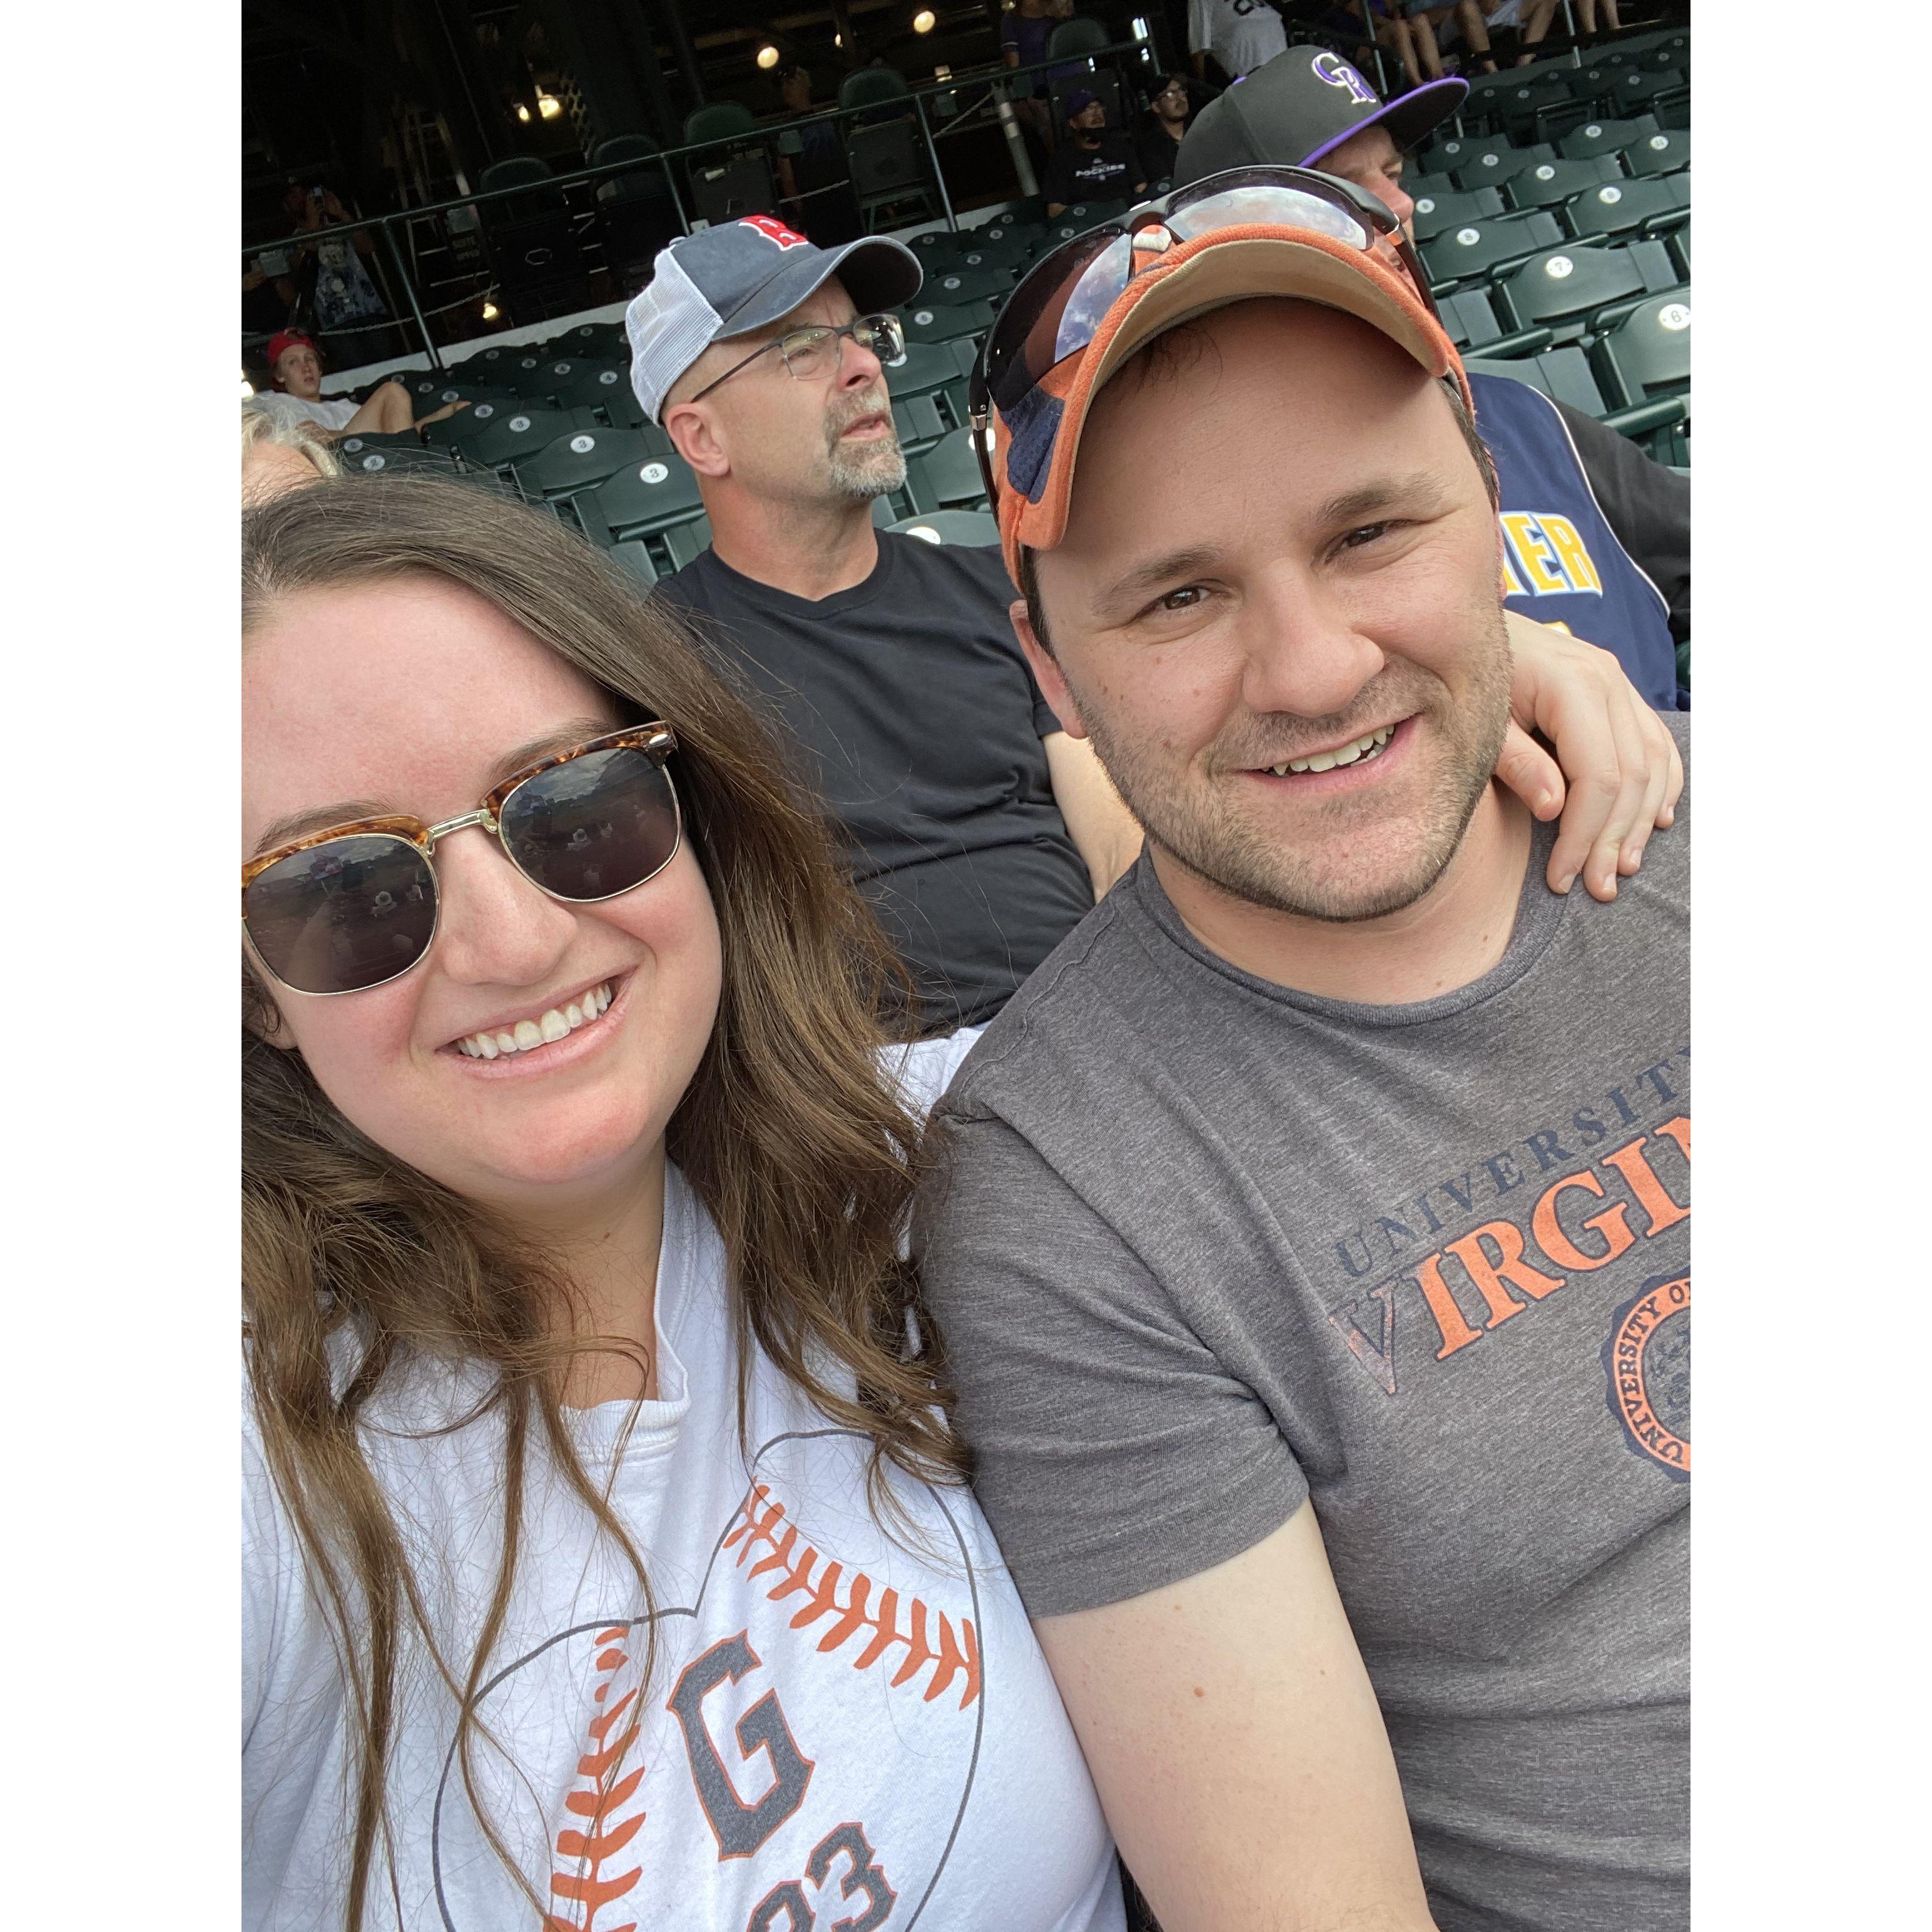 Our first baseball game together